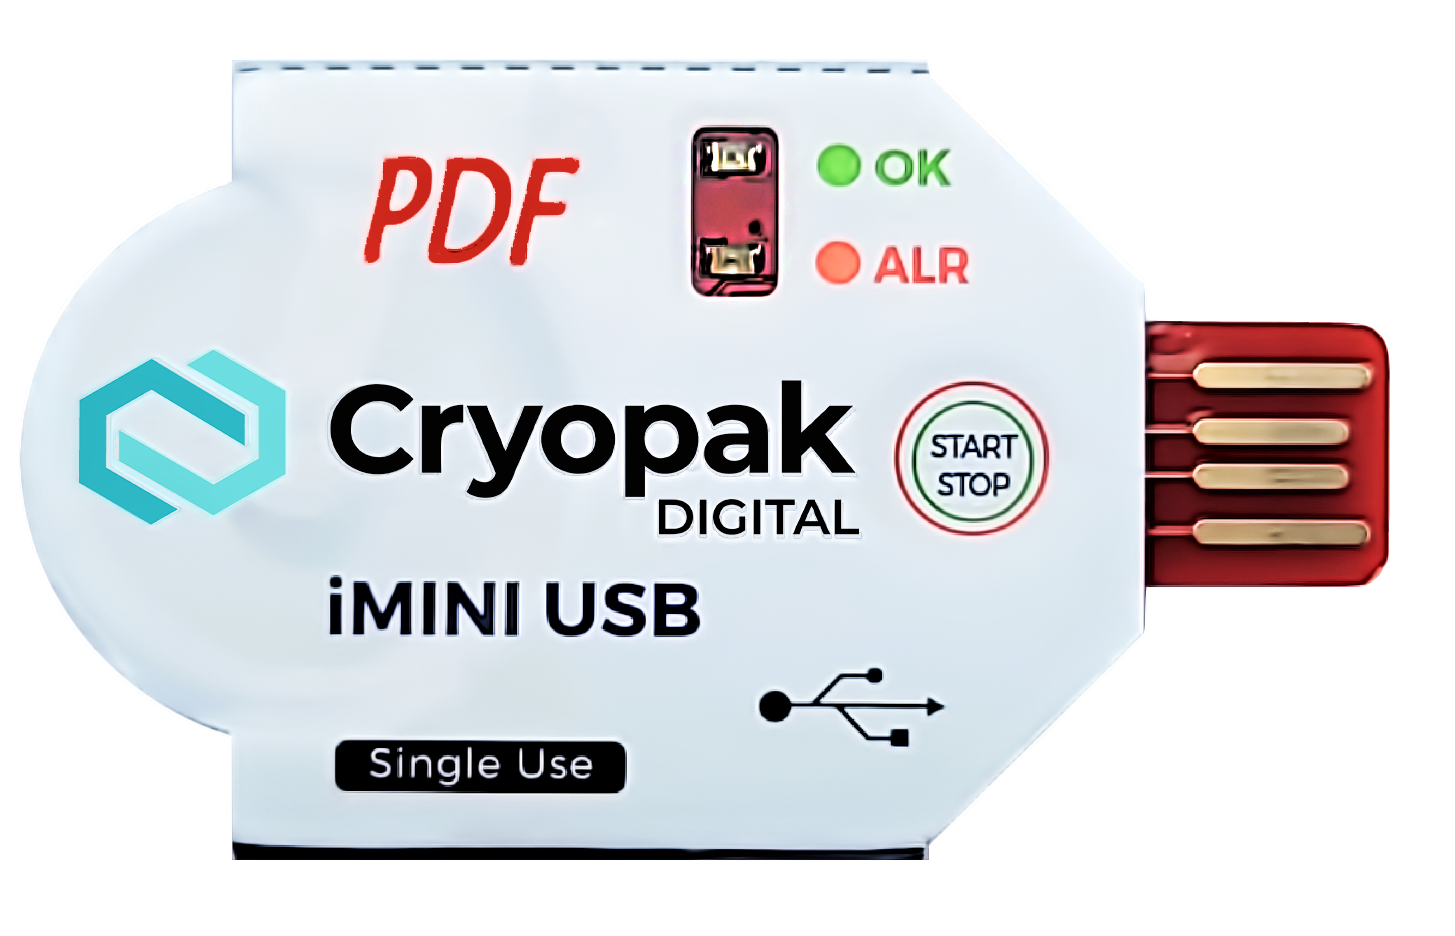 Cryopak imini usb software download steelseries software download